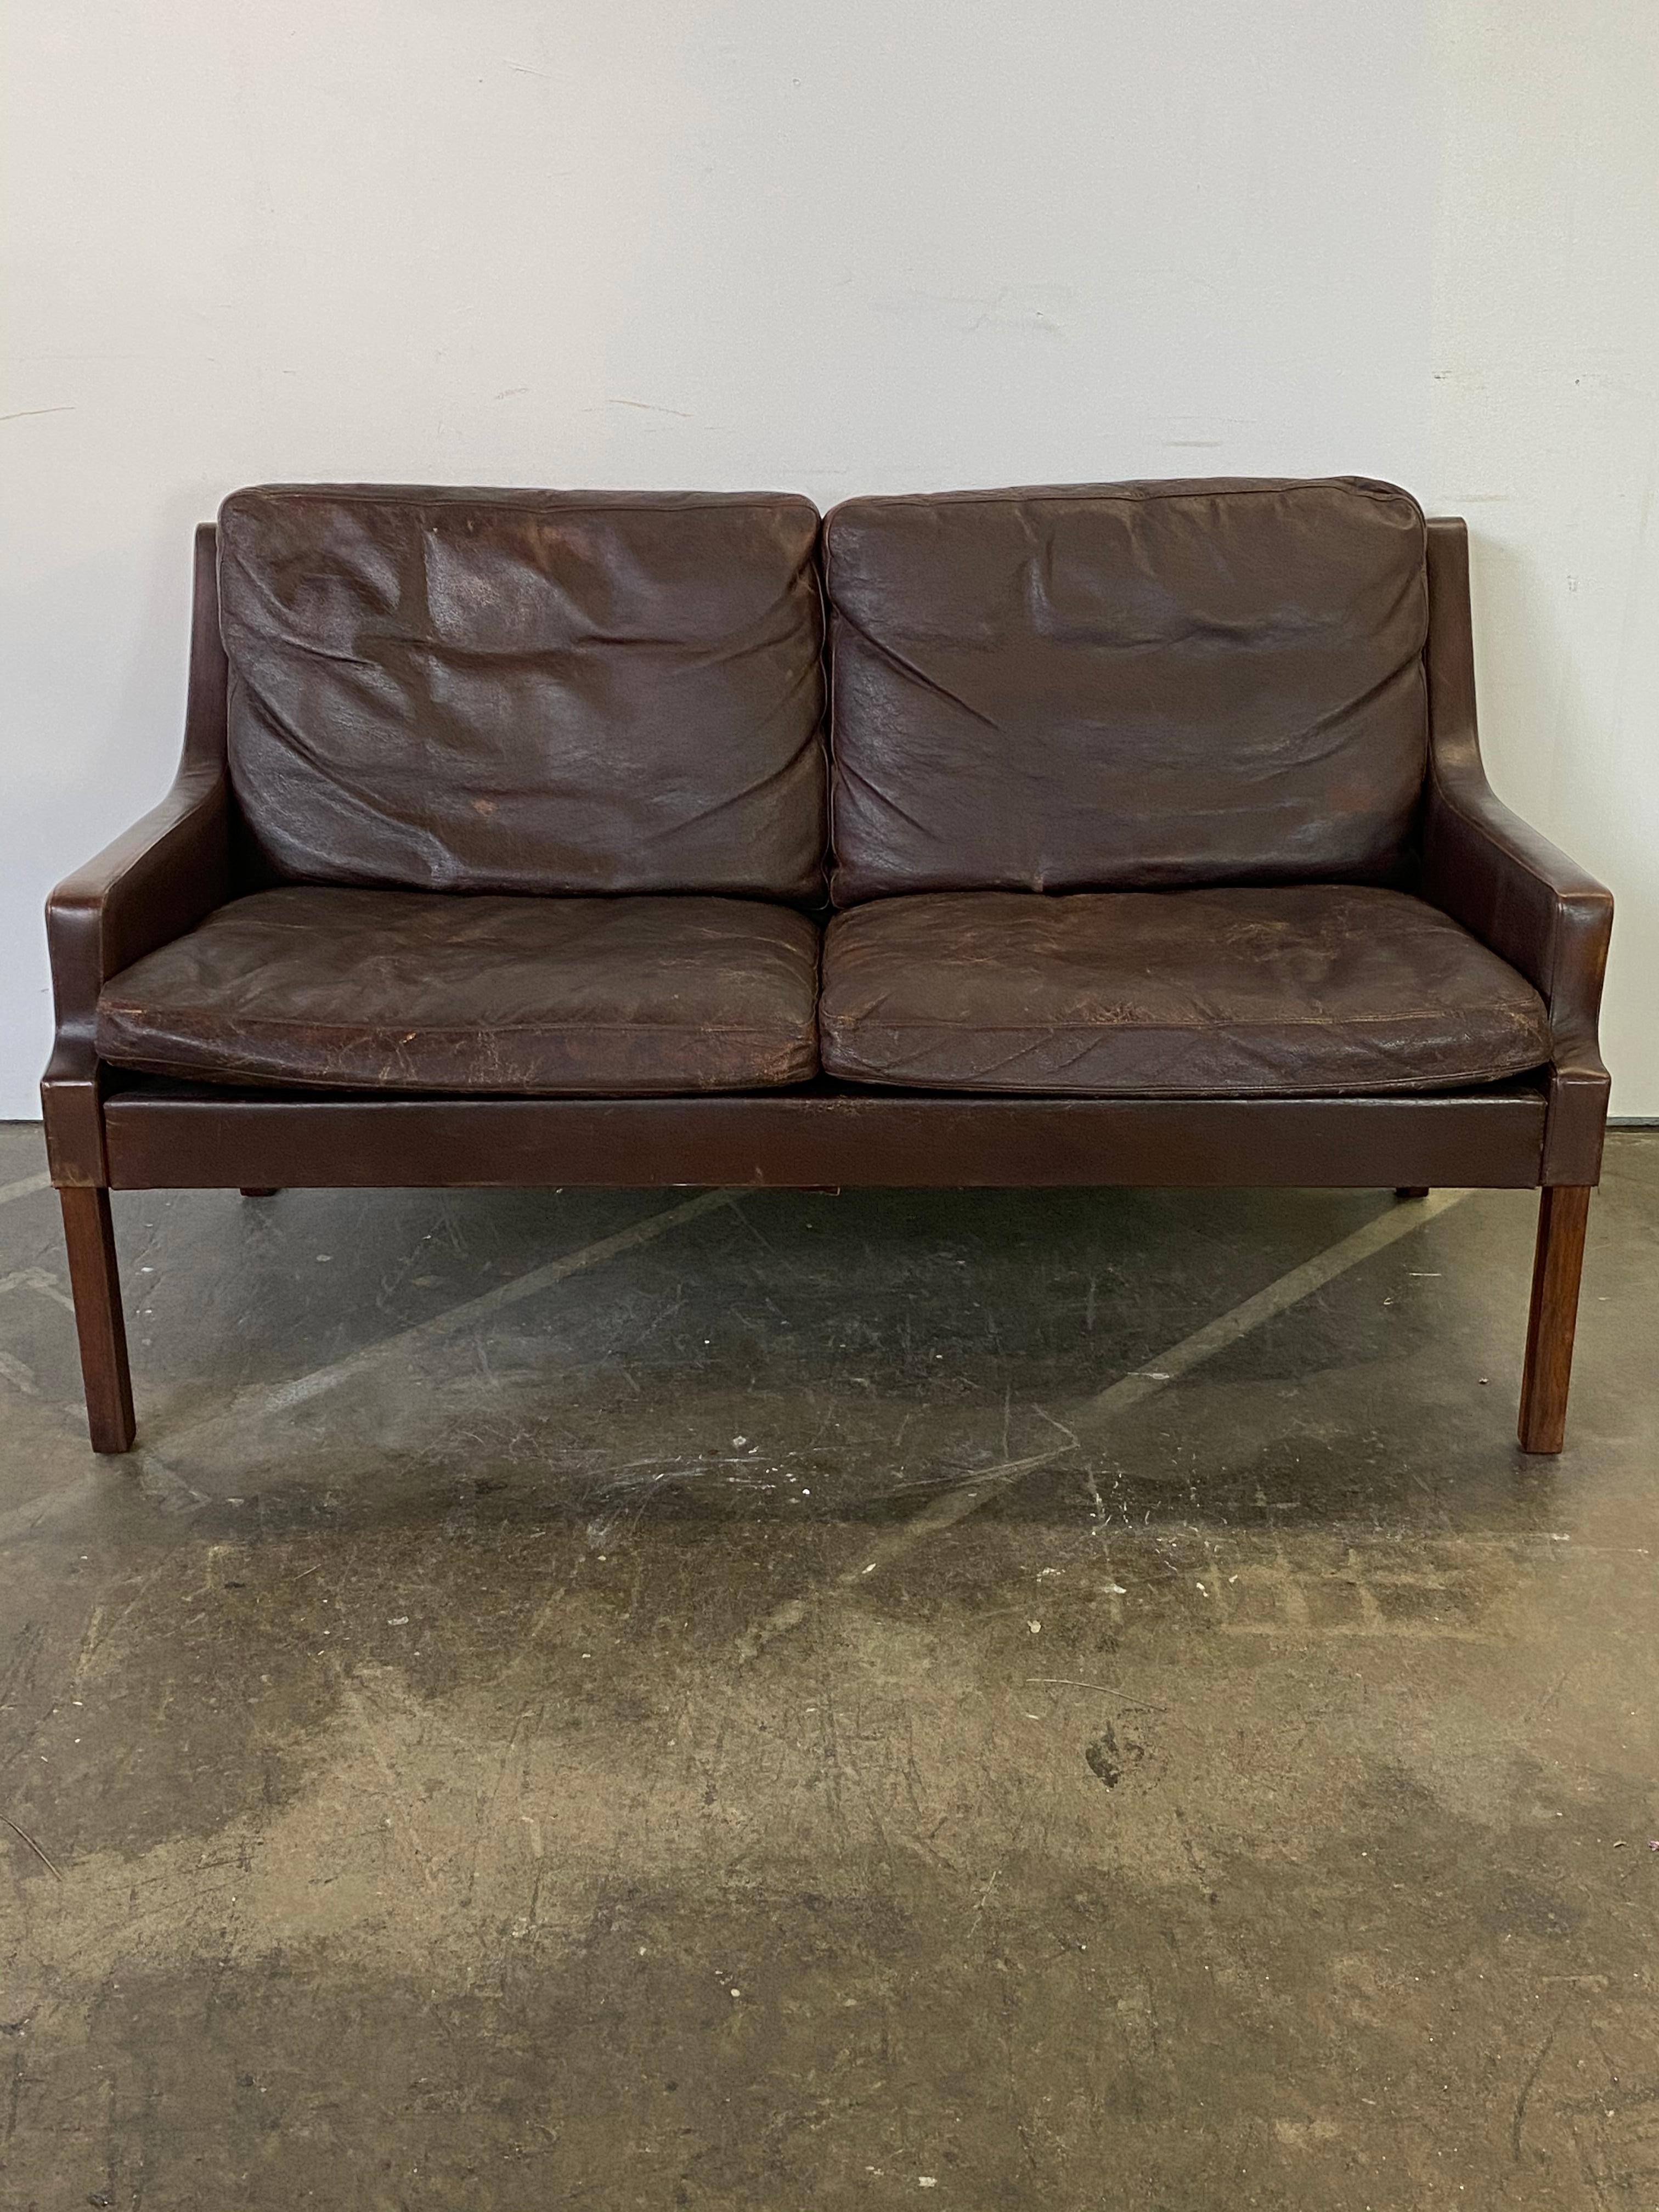 Elegant Danish modern loveseat sofa designed by Georg Thams. This piece has aged gracefully and boasts a spectacular Patina on the brown leather cushions, which have been cleaned and conditioned. The 4 rosewood square legs are in good shape with